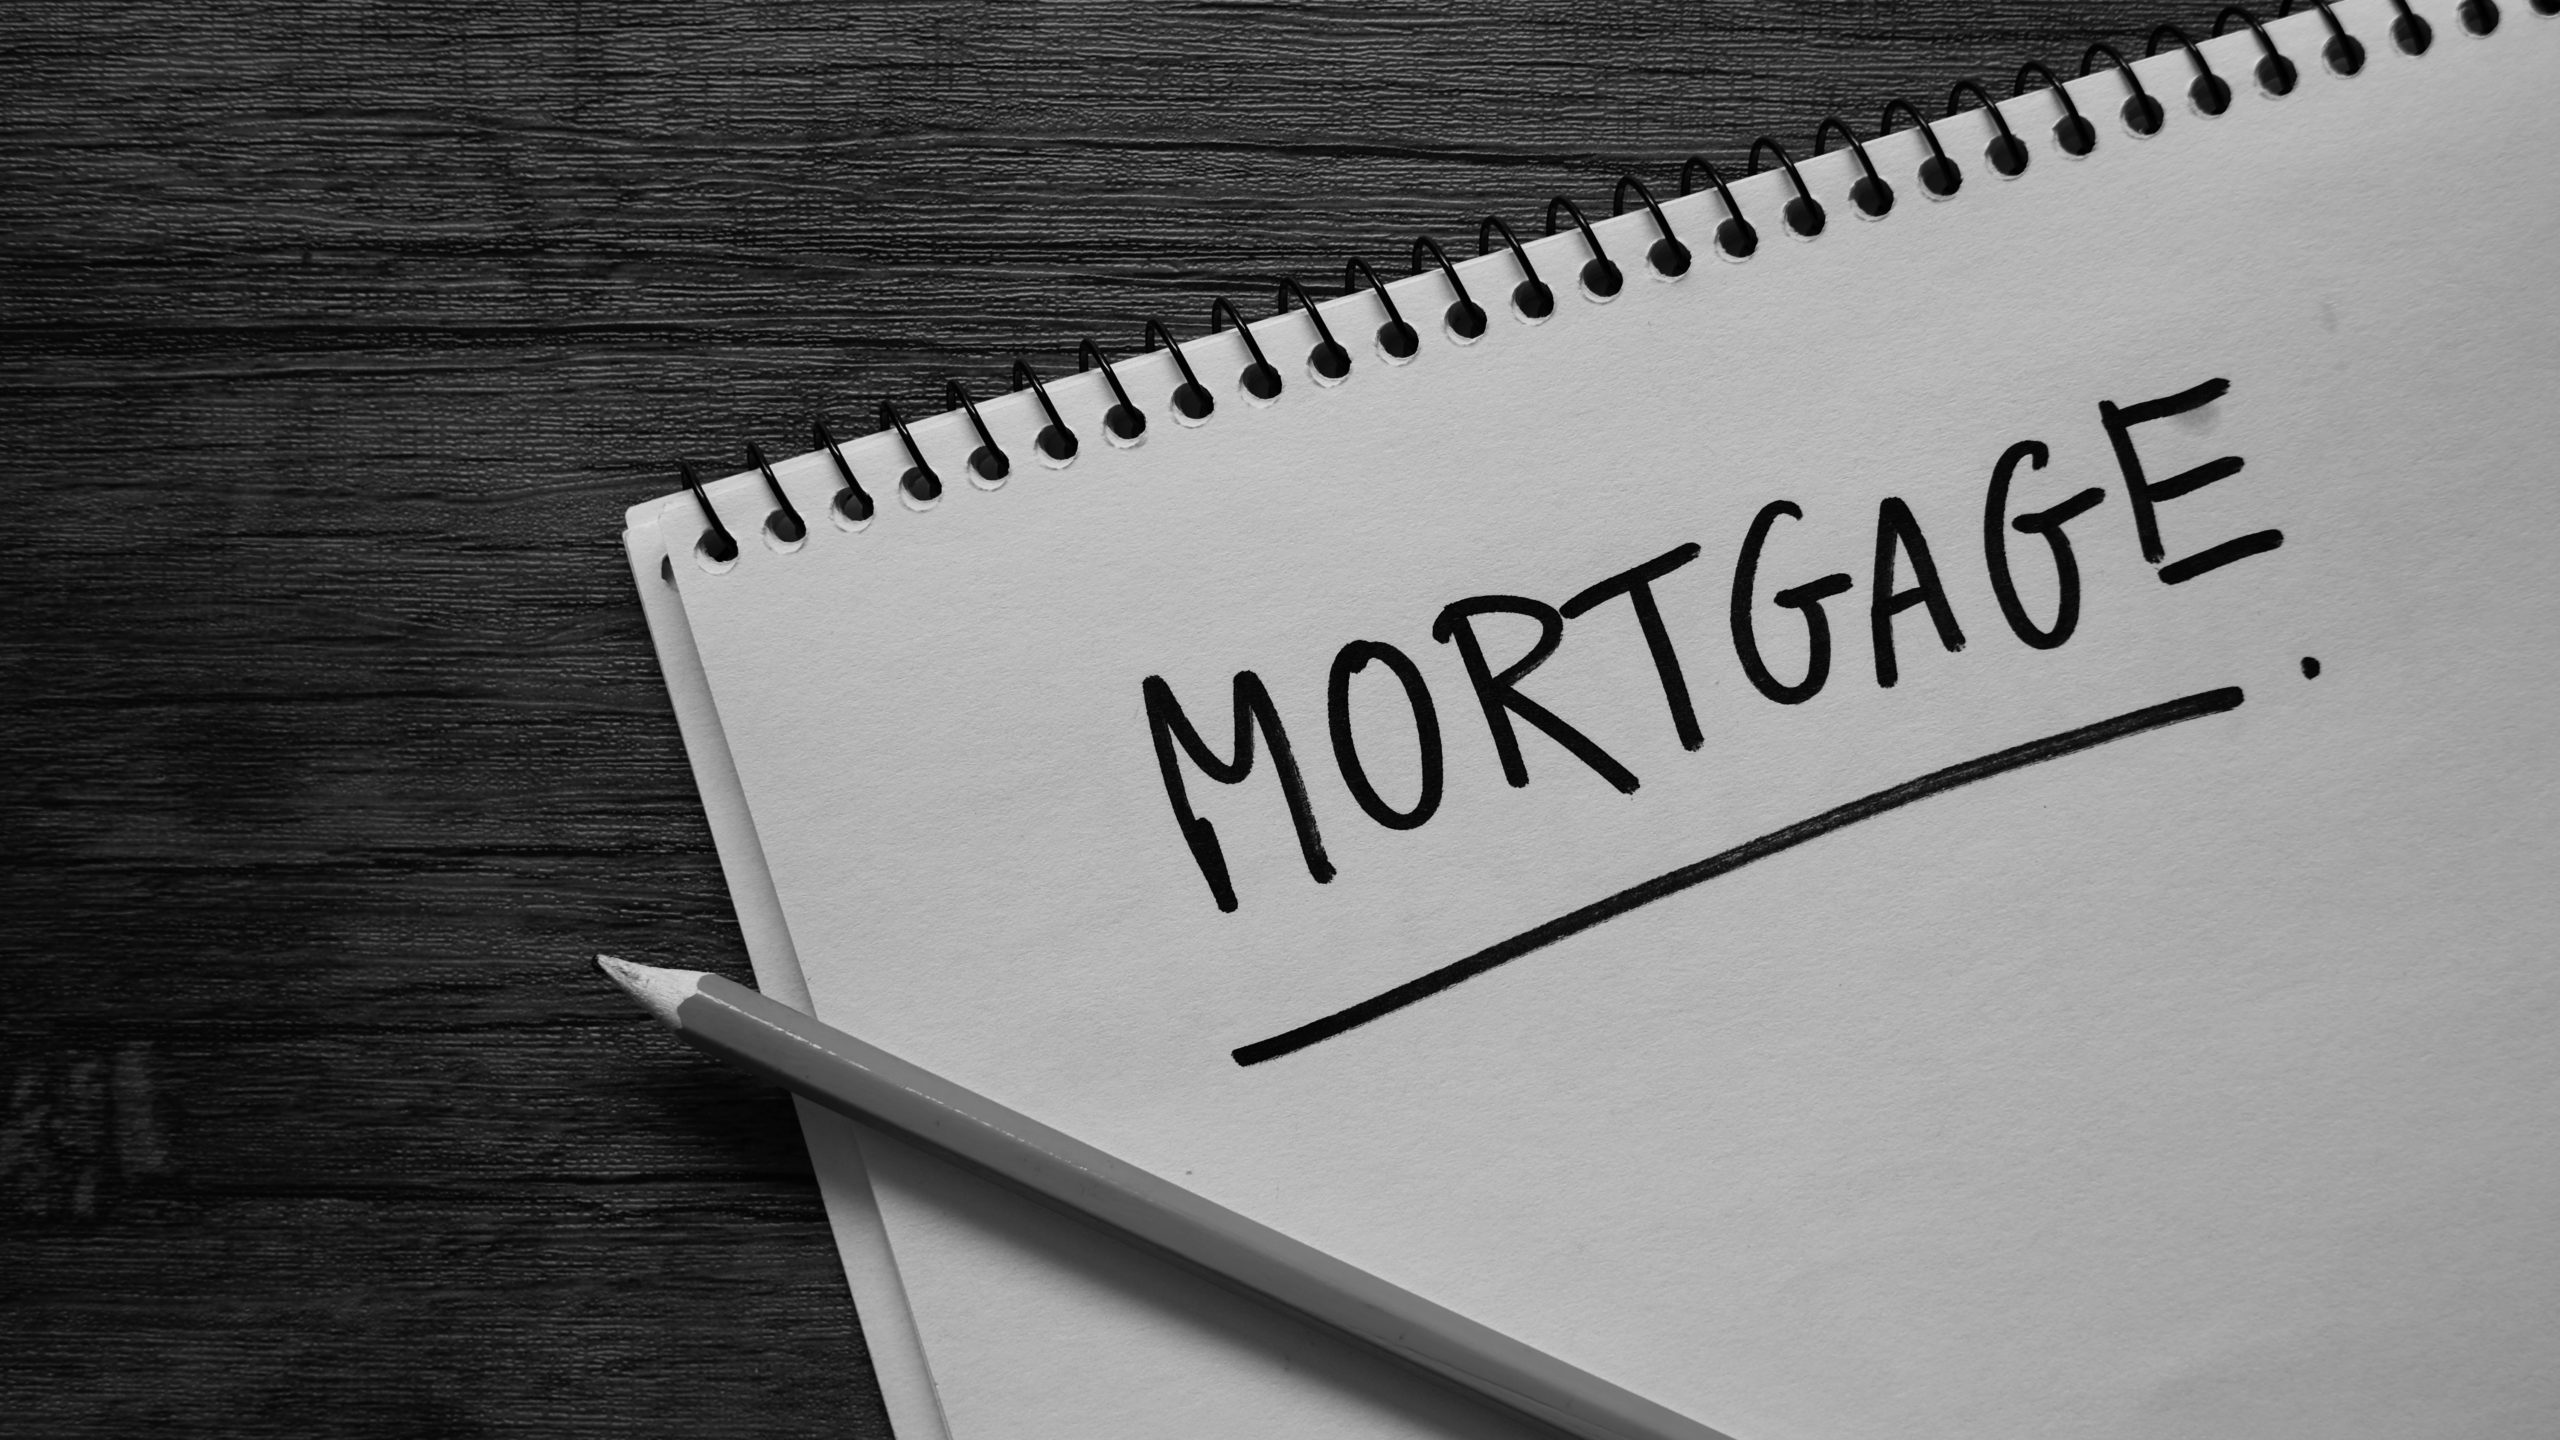 Interest rates are down – should you break your mortgage